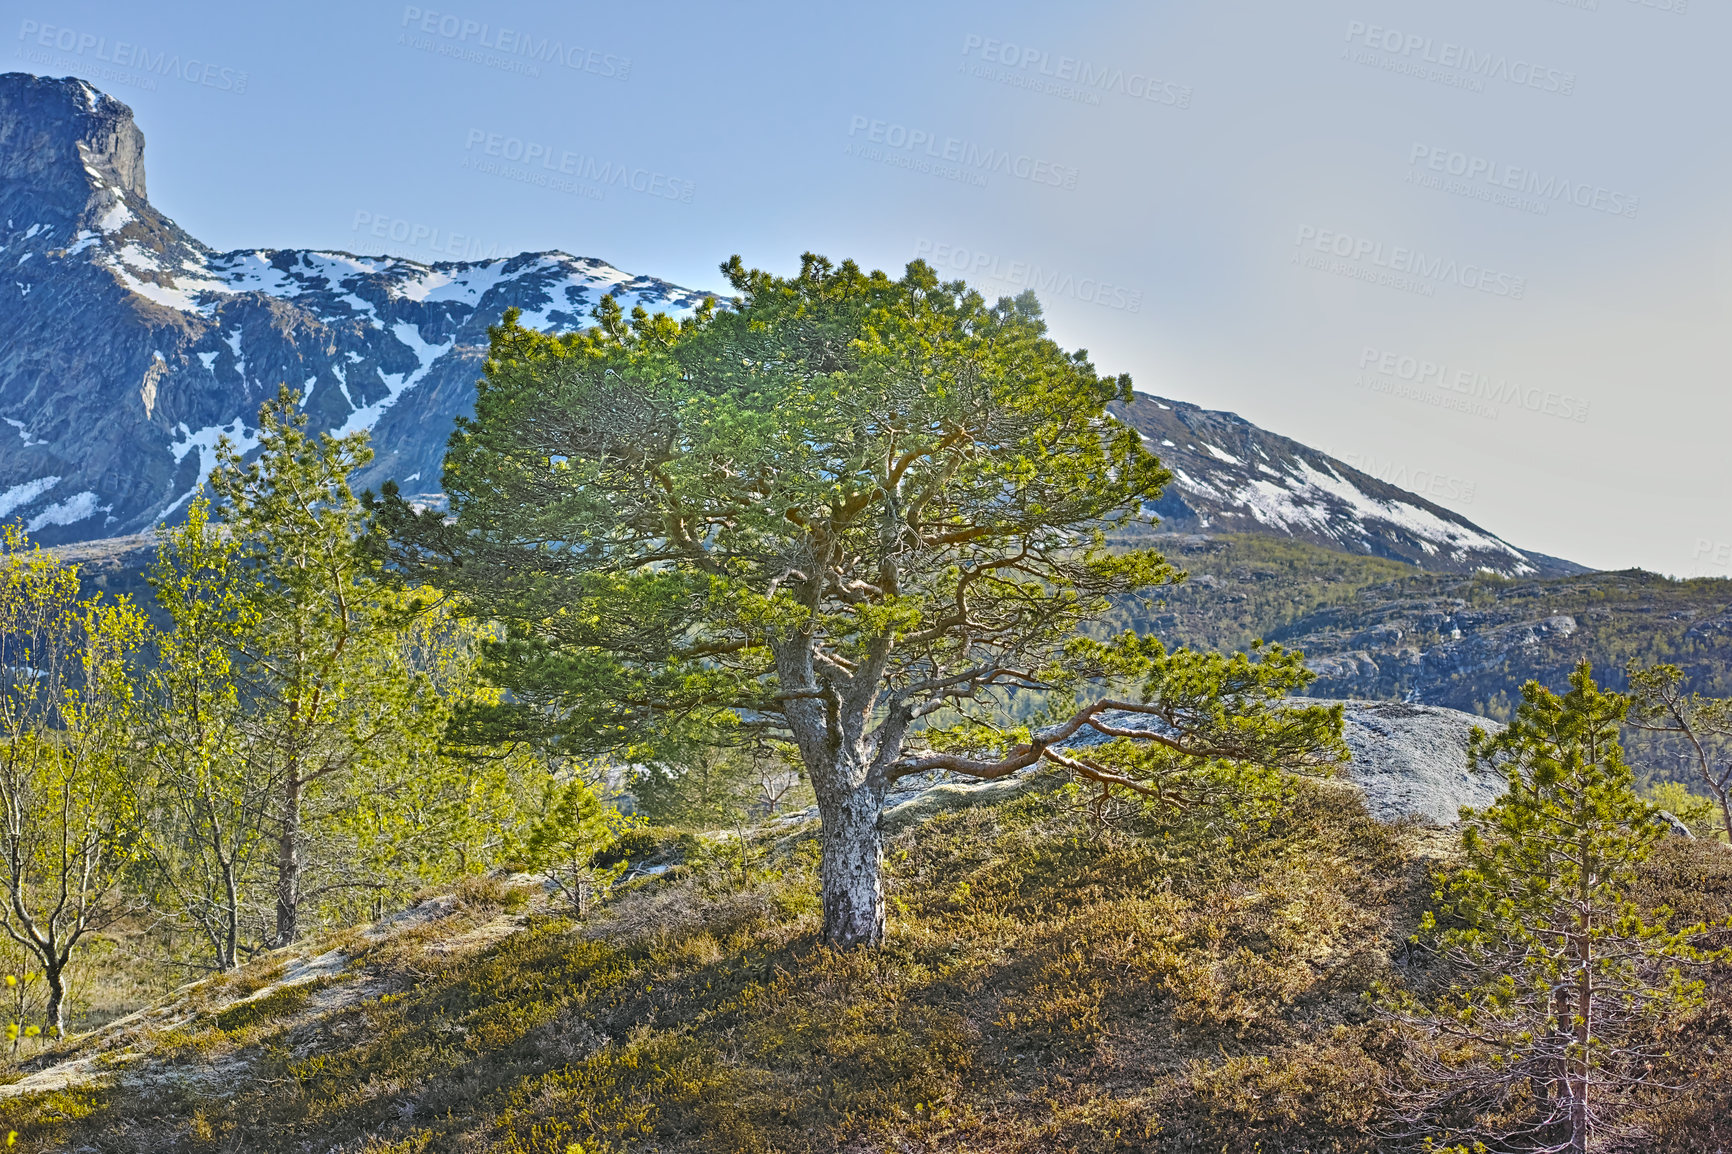 Buy stock photo Forest trees by the mountains with melting snow in early Spring on a blue sky with copy space. Landscape of a big tree with lush green leaves, branches and grass land near a rocky mountain in Norway